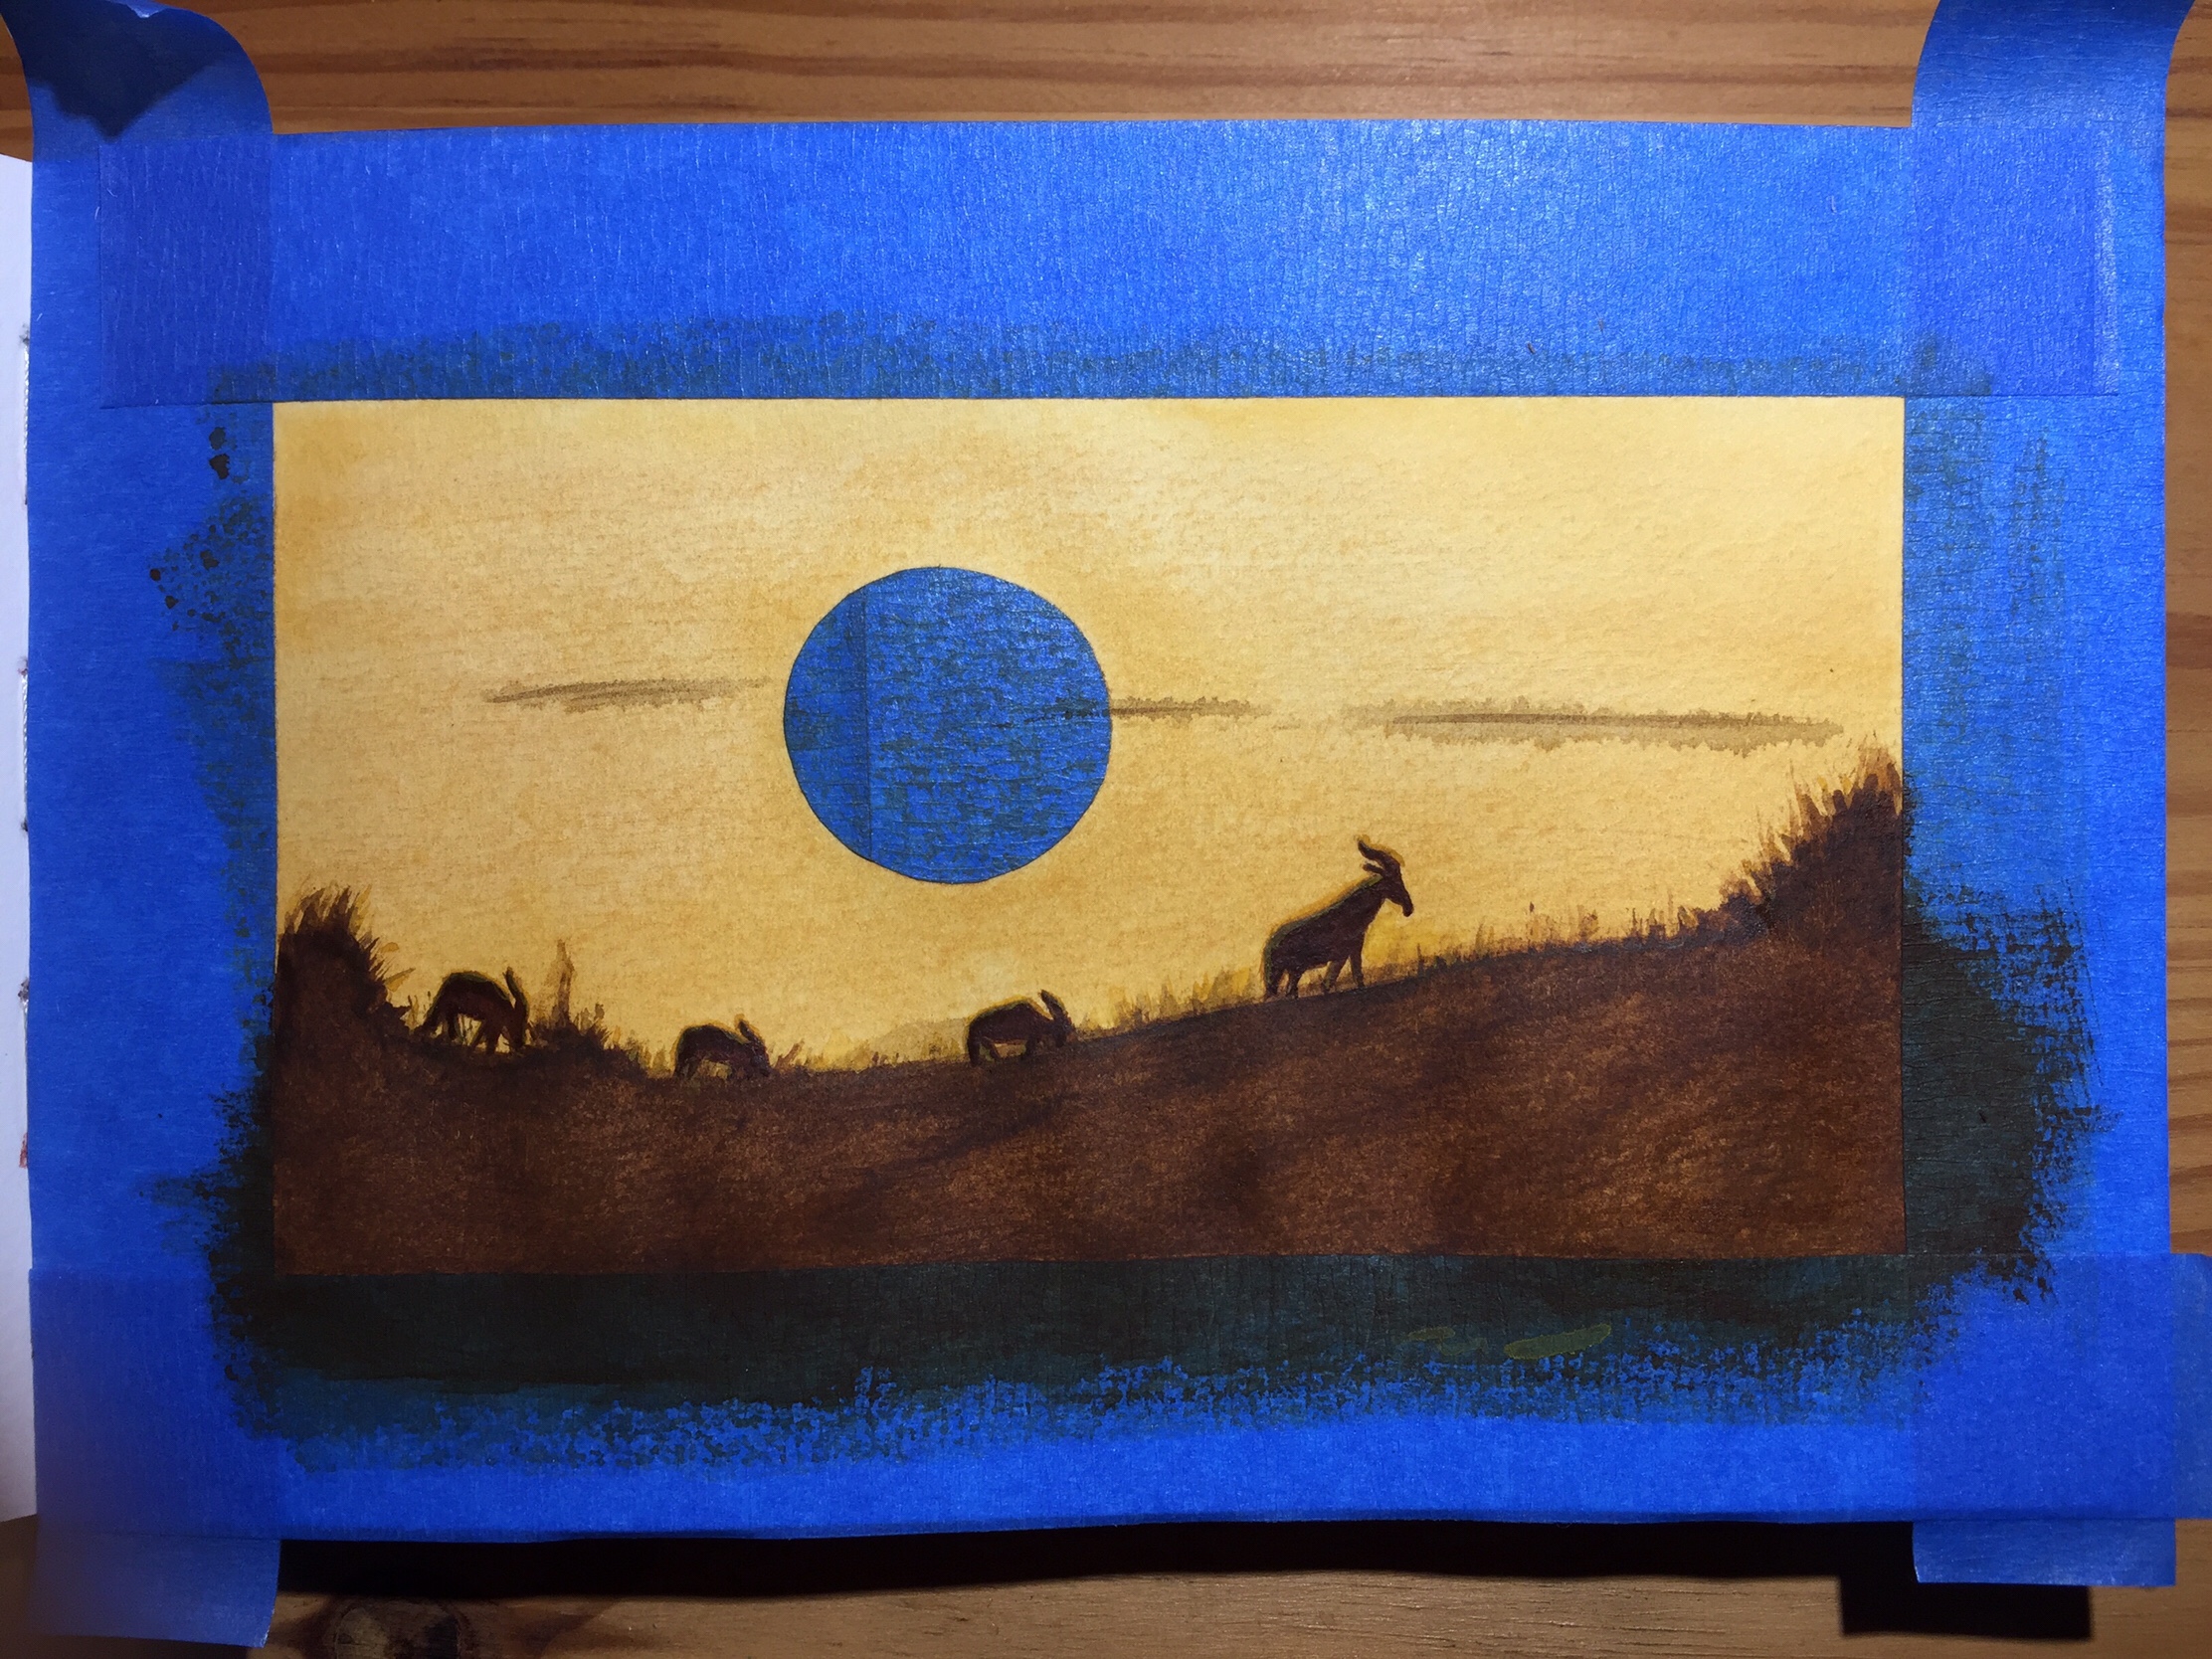 I darkened the ground and painted the antelopes silhouettes with burnt sienna and black